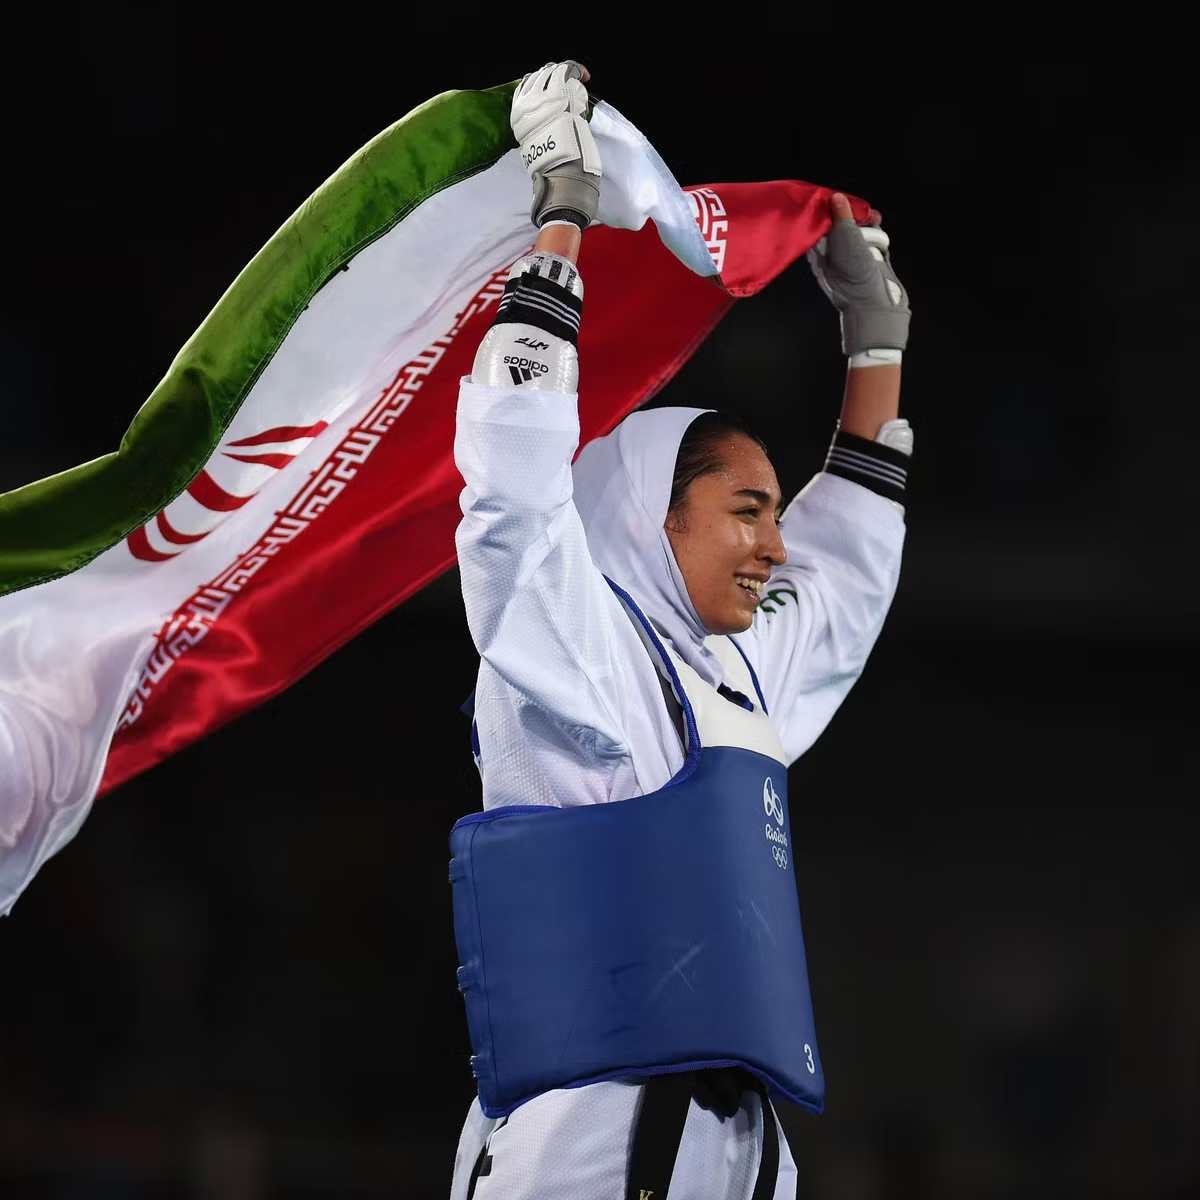 Kimia Alizadeh Zenoorin won an Olympic bronze medal in taekwondo at Rio 2016 competing in Iran's colours but has since defected and will now compete for the EOC Refugee Team at this year's European Games ©Getty Images